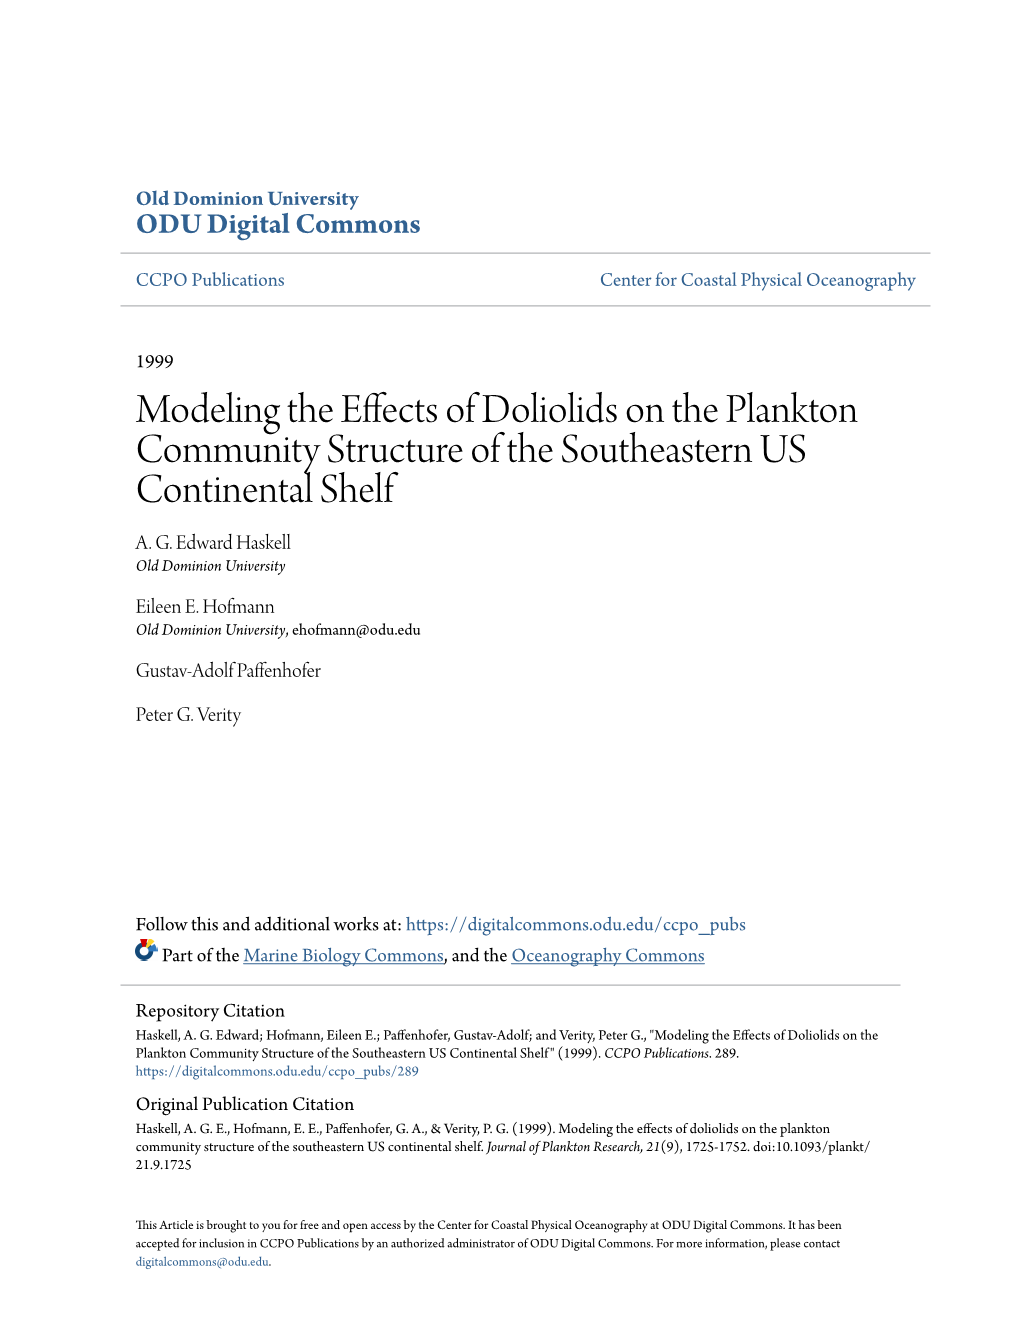 Modeling the Effects of Doliolids on the Plankton Community Structure of the Southeastern US Continental Shelf A